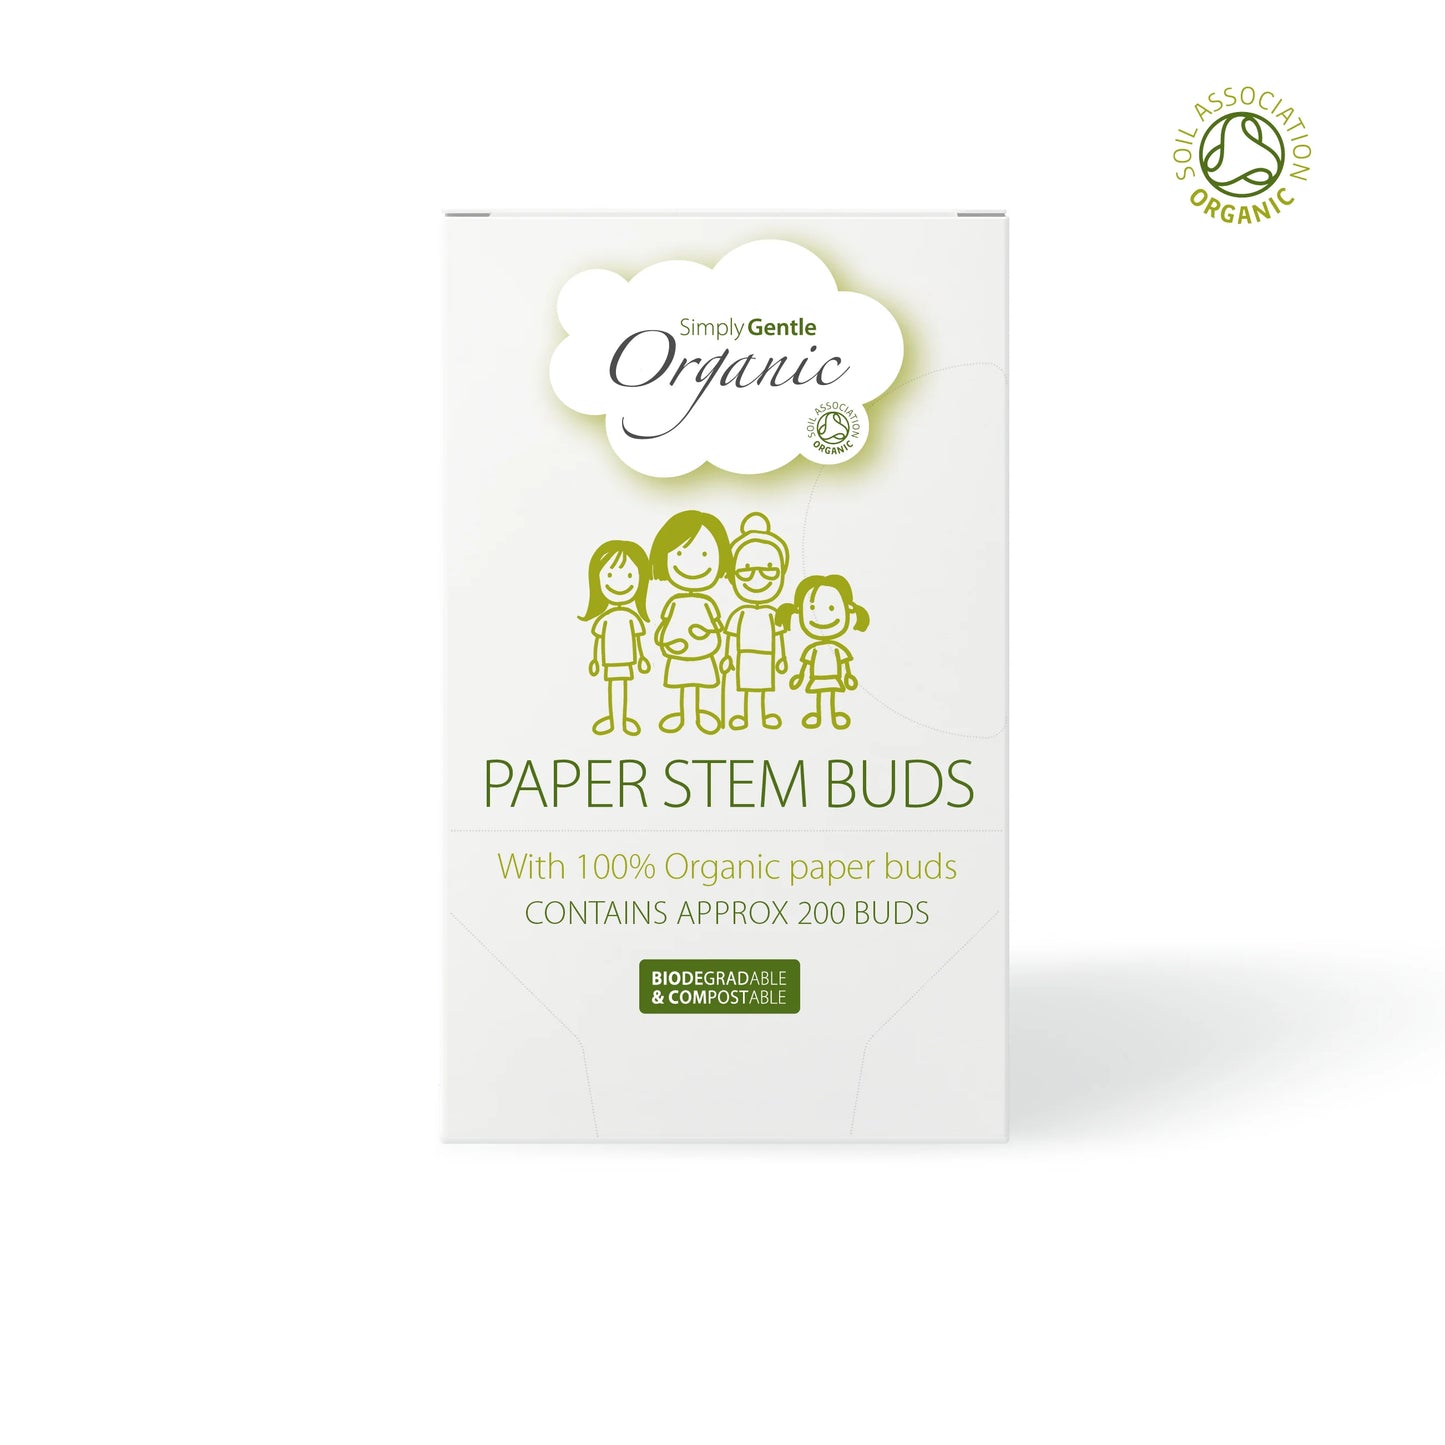 Simply Gentle Organic Paper Stem Cotton Buds Approx. 200 Pack, Naturally Absorbent & Gentle